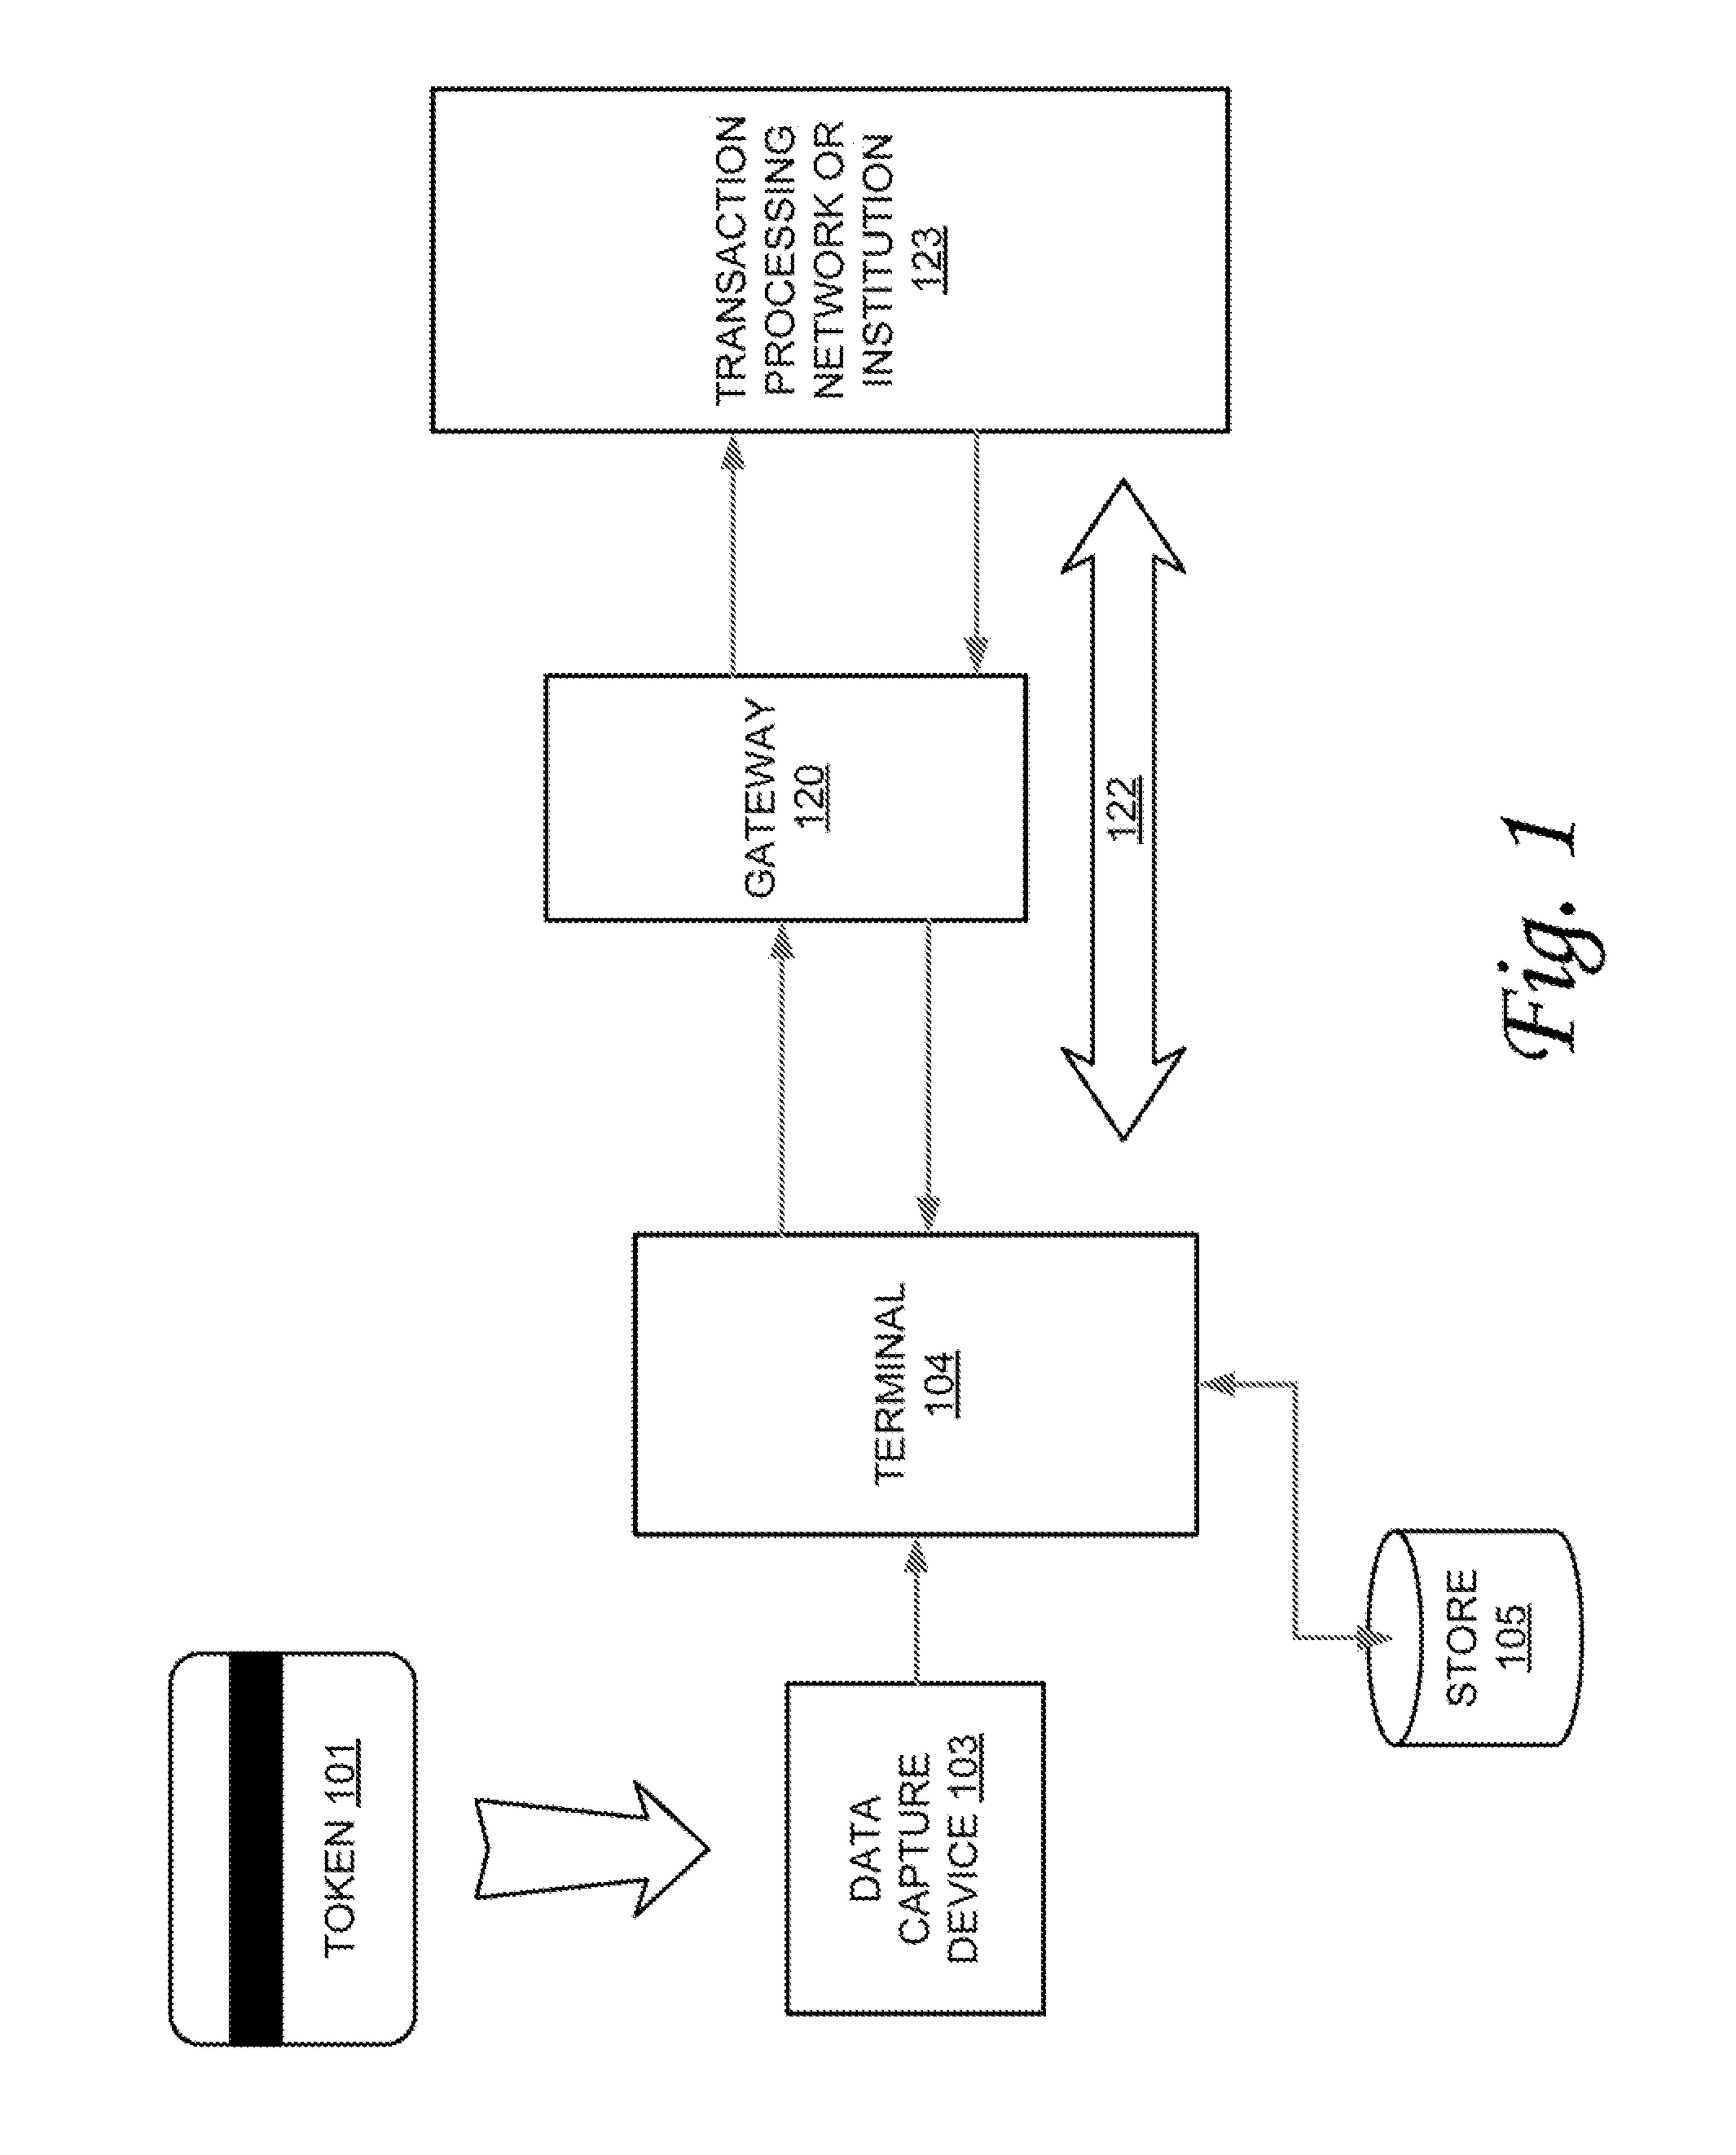 System and method for variable length encryption